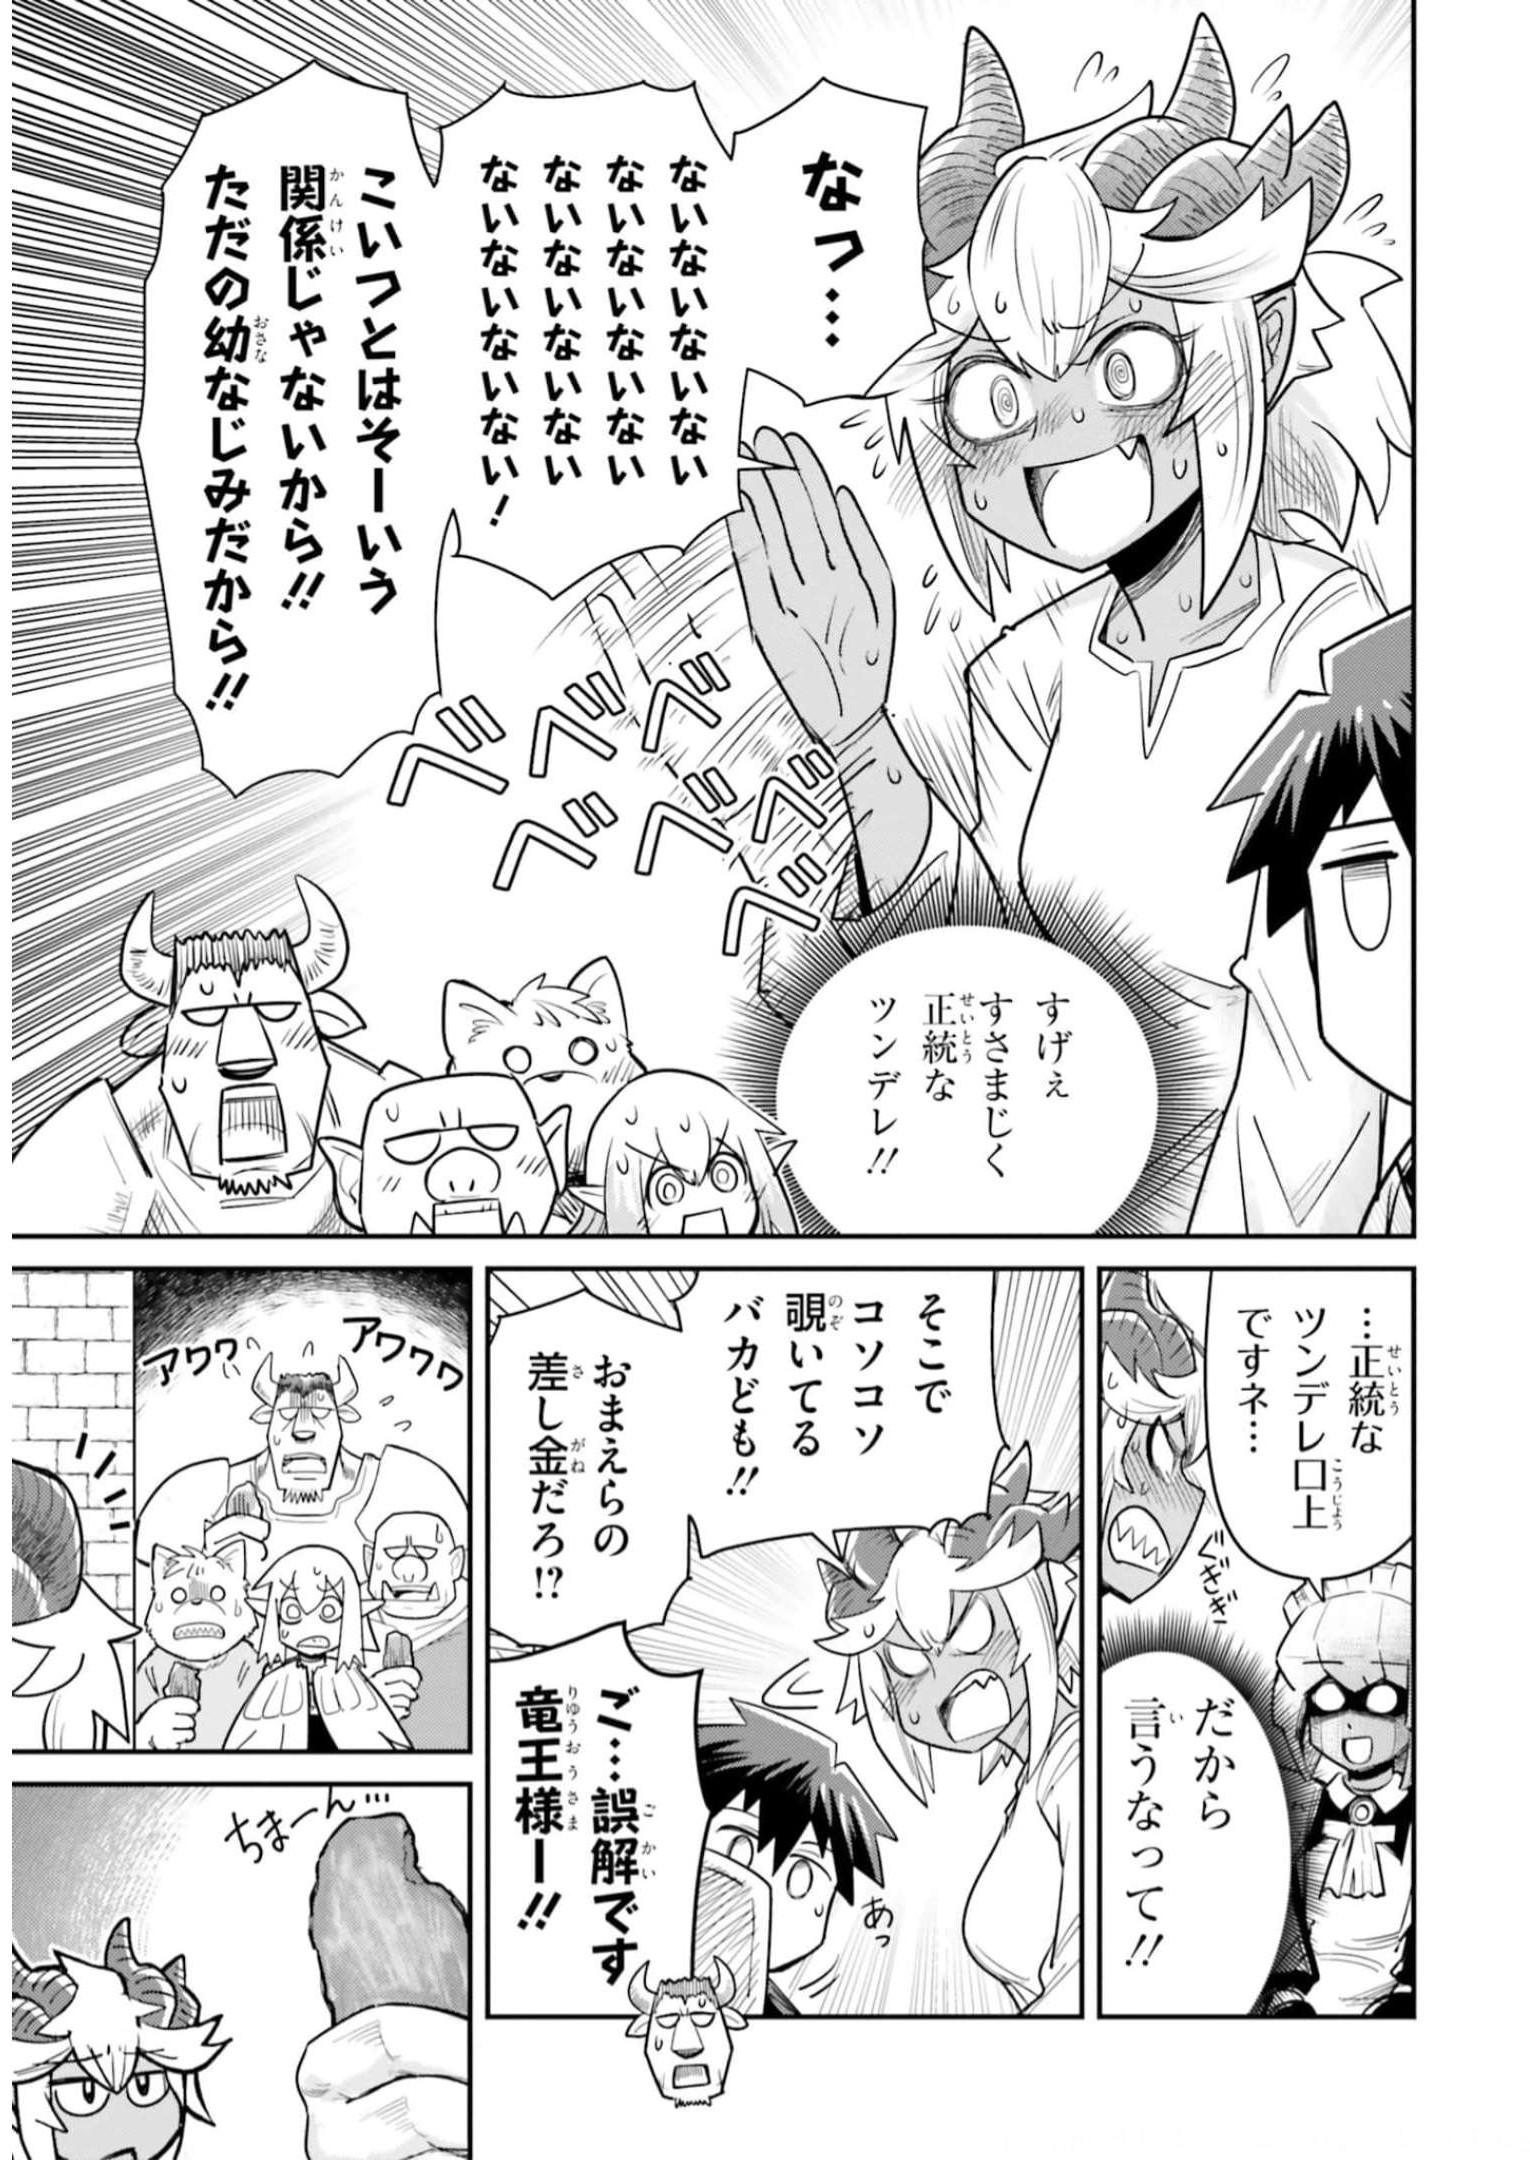 Dungeon Friends Forever Dungeon’s Childhood Friend ダンジョンの幼なじみ 第13話 - Page 11